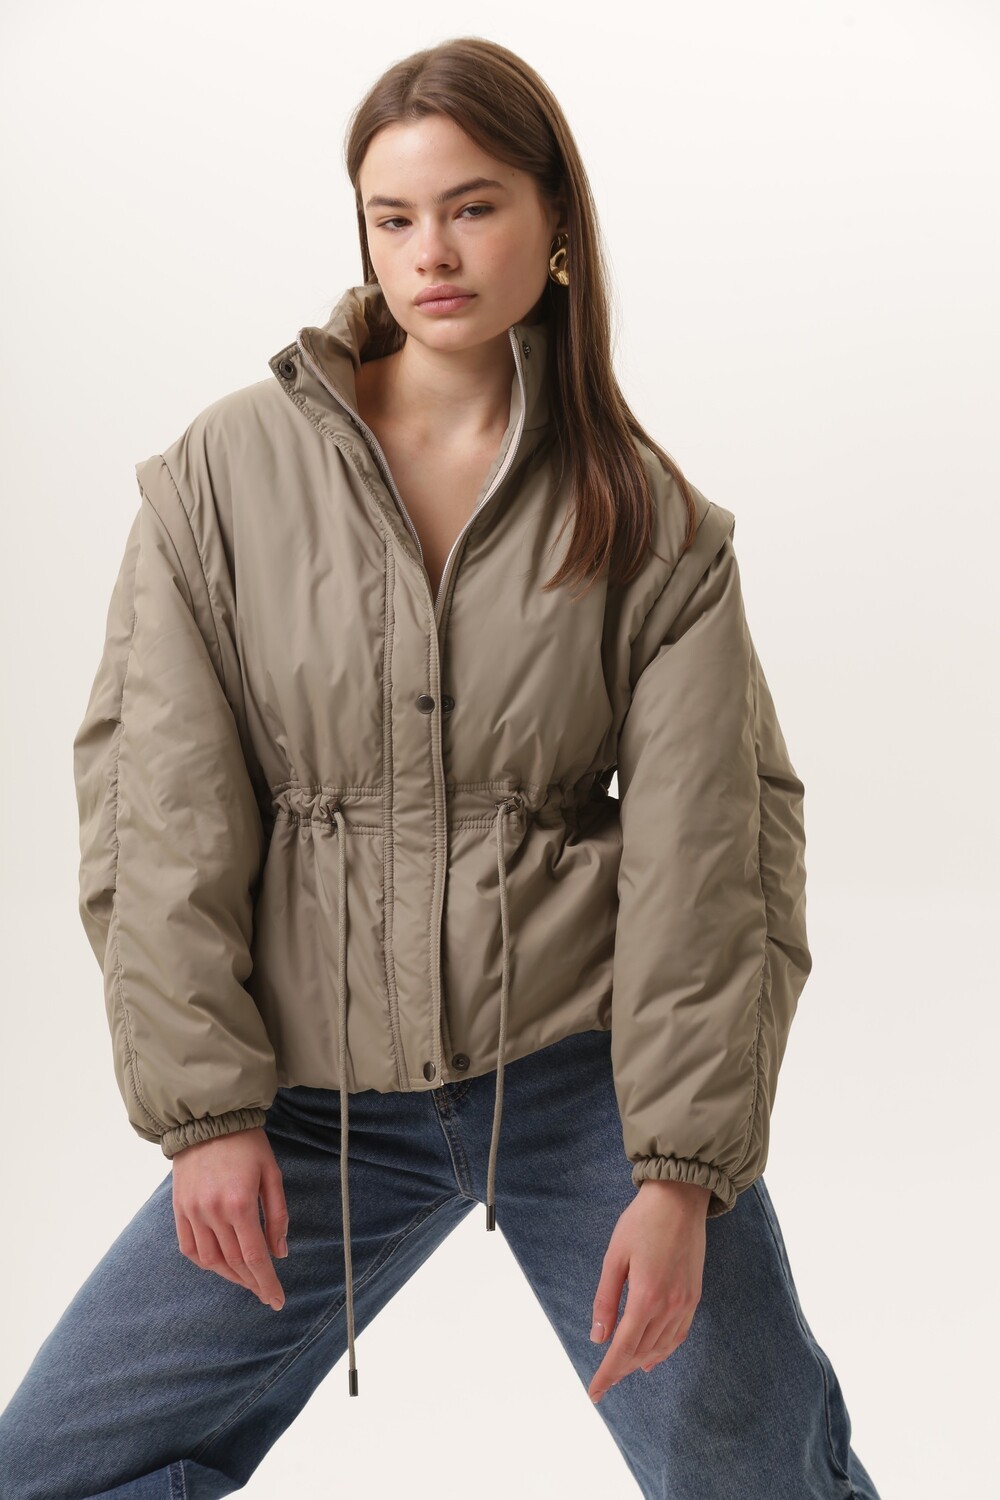 Muscovite jacket in olive color